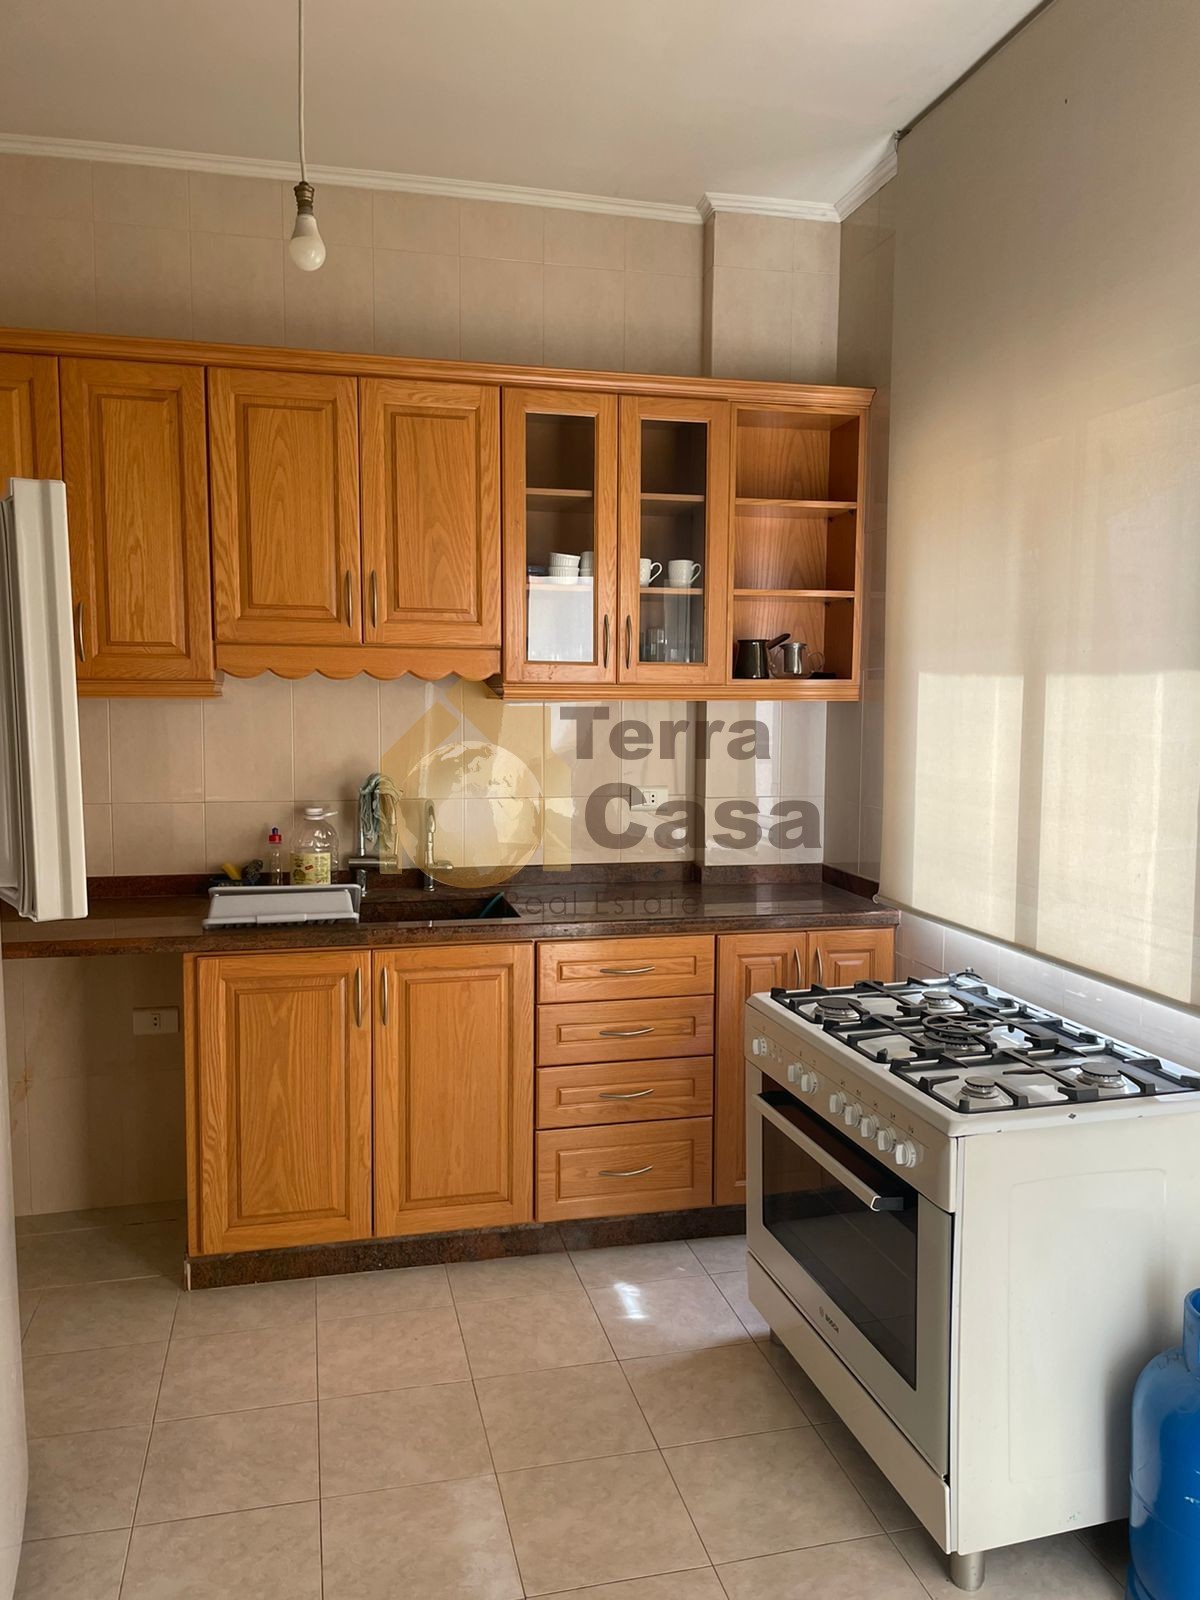 Rmeil fully furnished apartment for rent.